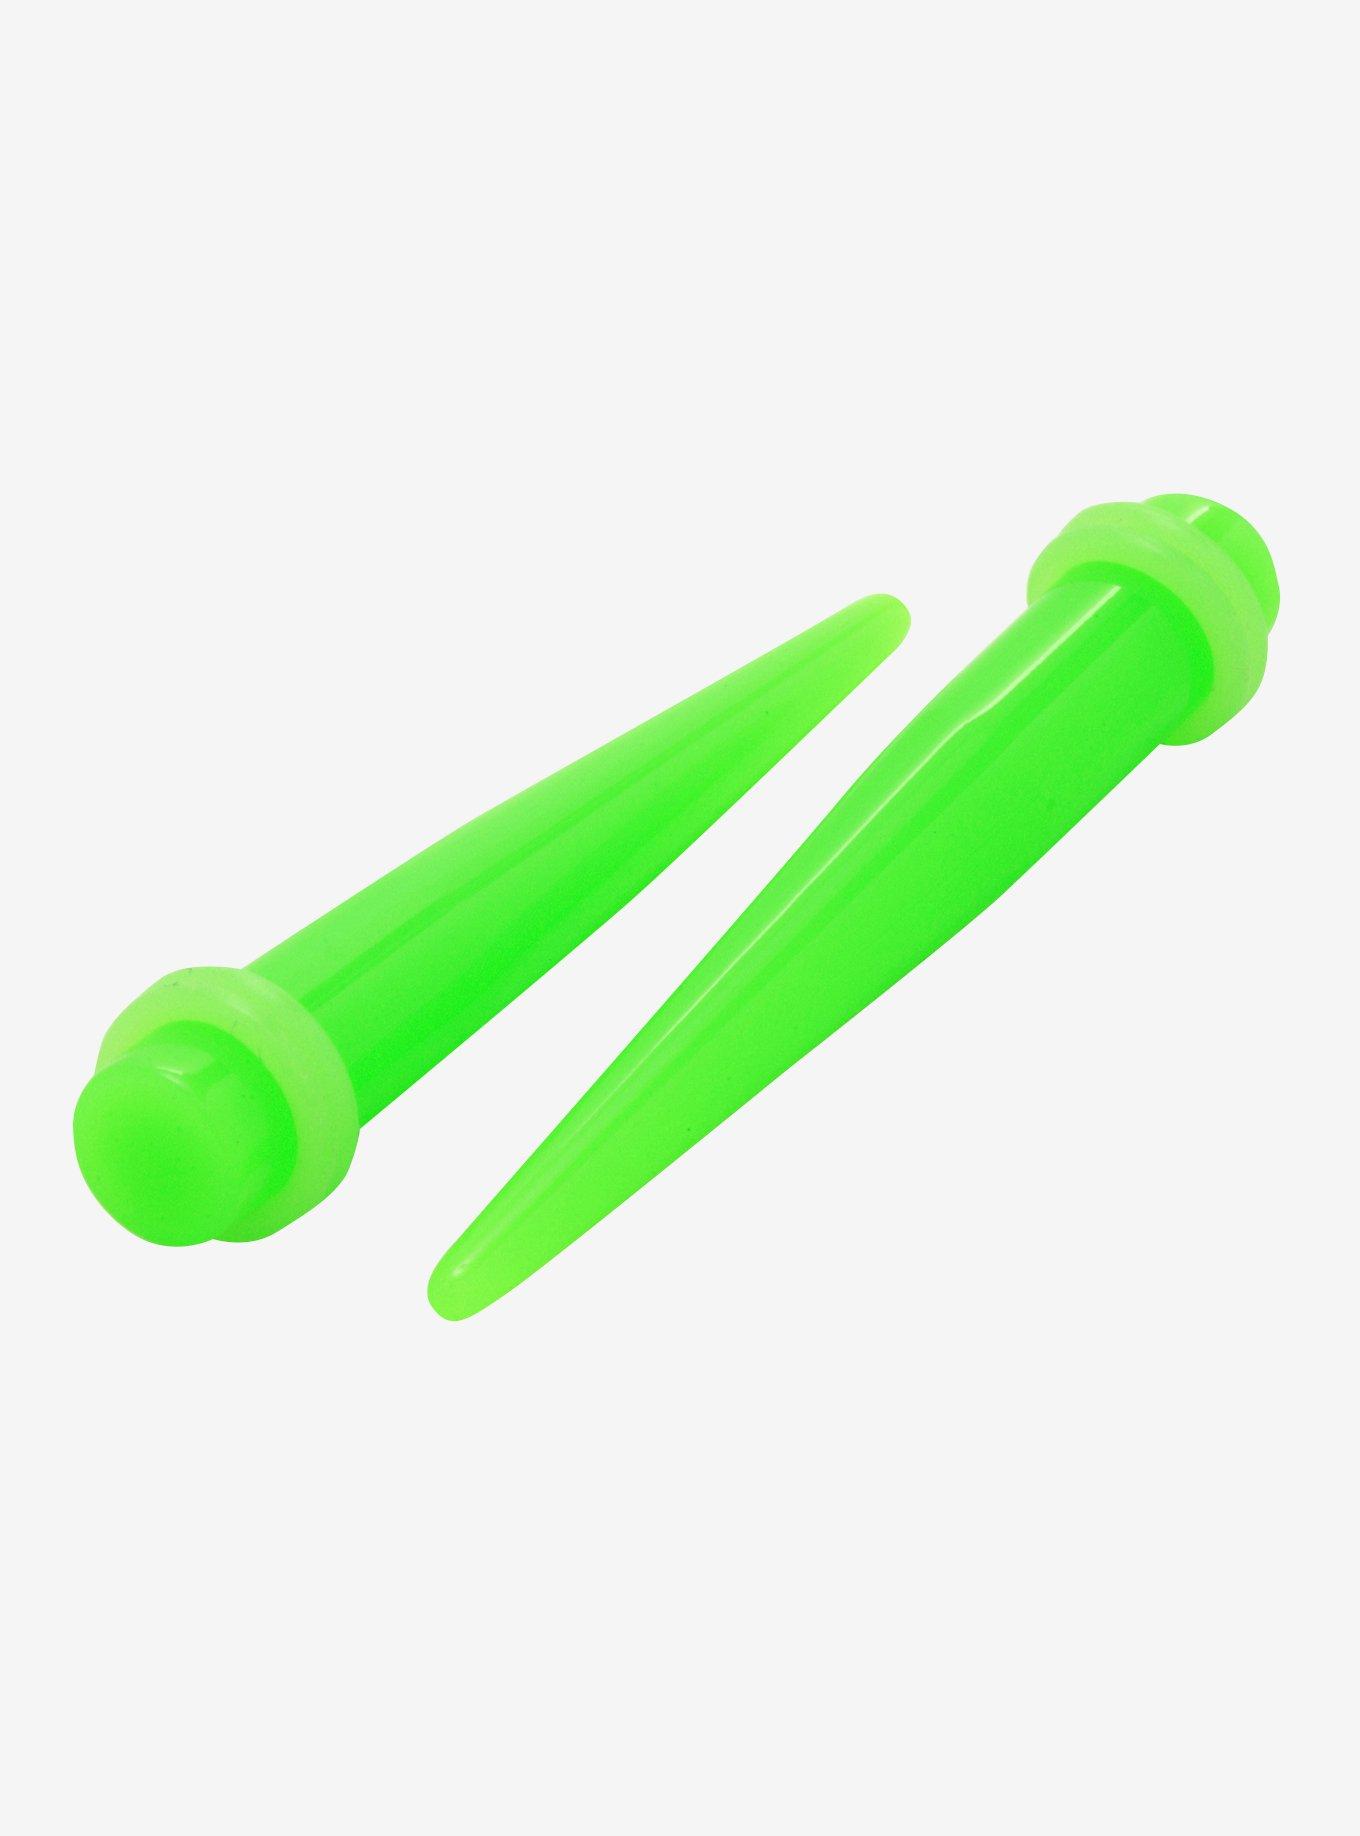 Acrylic Neon Green Taper 2 Pack, GREEN, hi-res